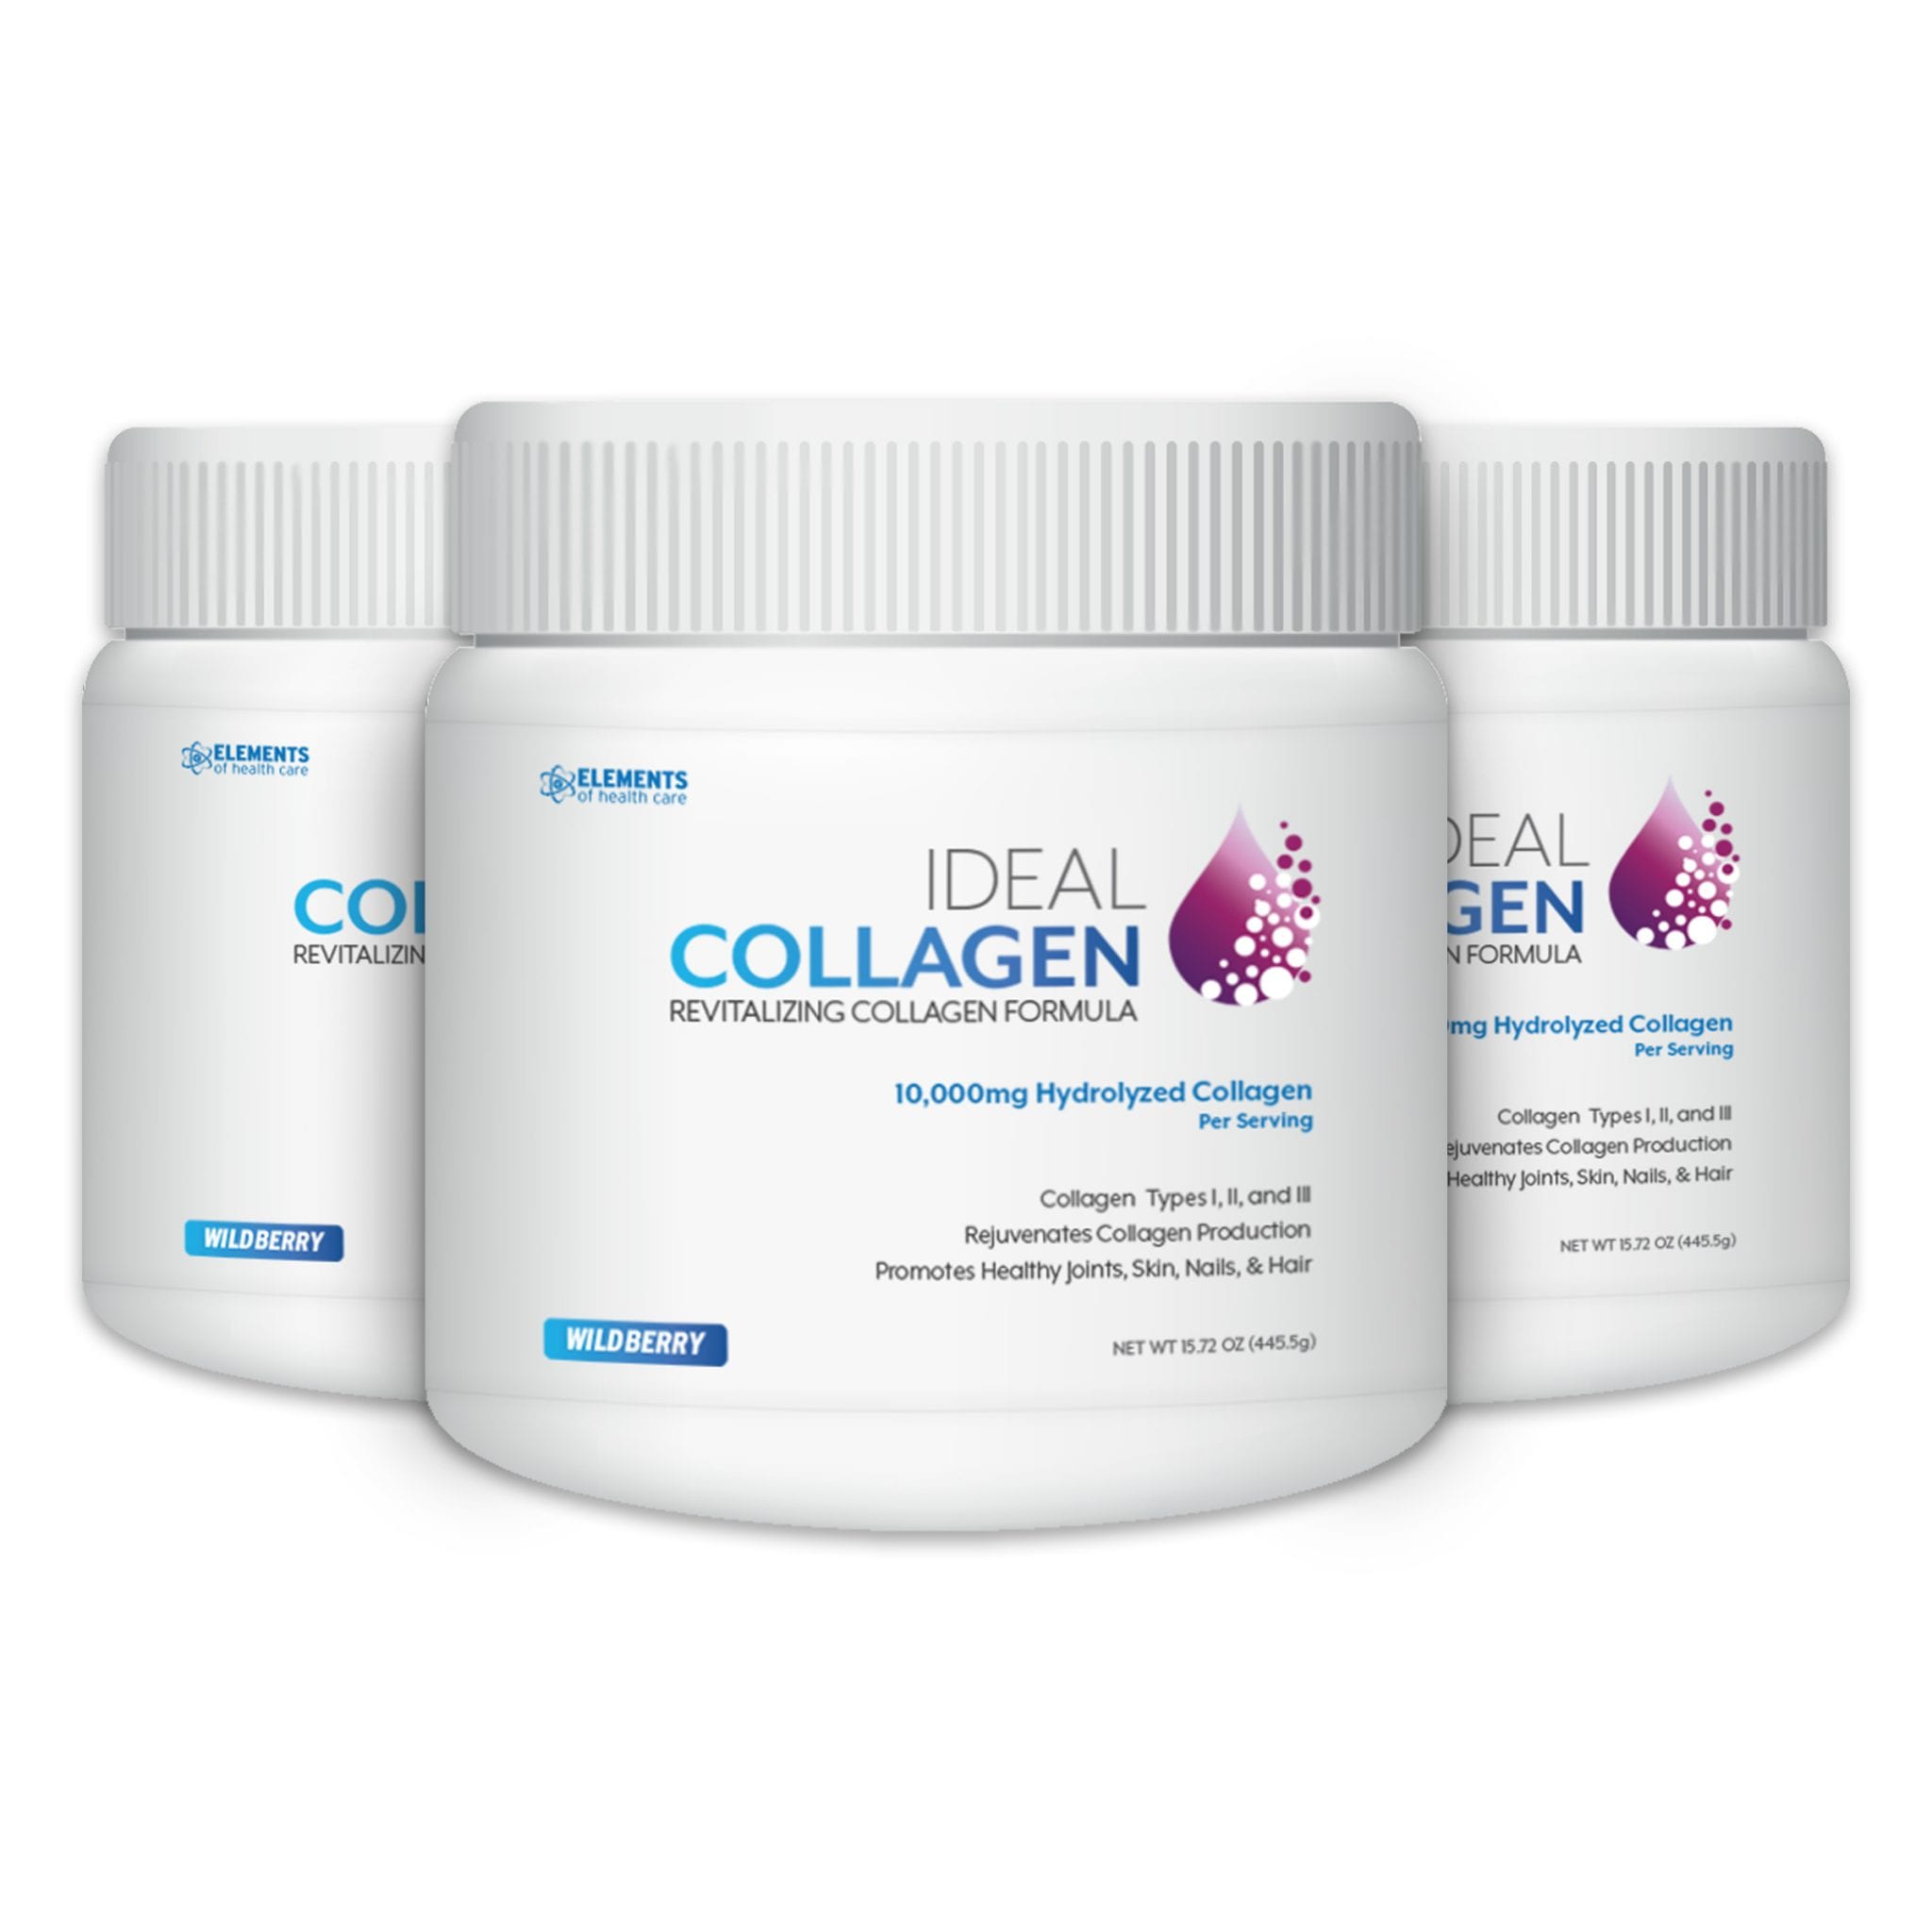 Is Collagen Good for Your Skin? Here